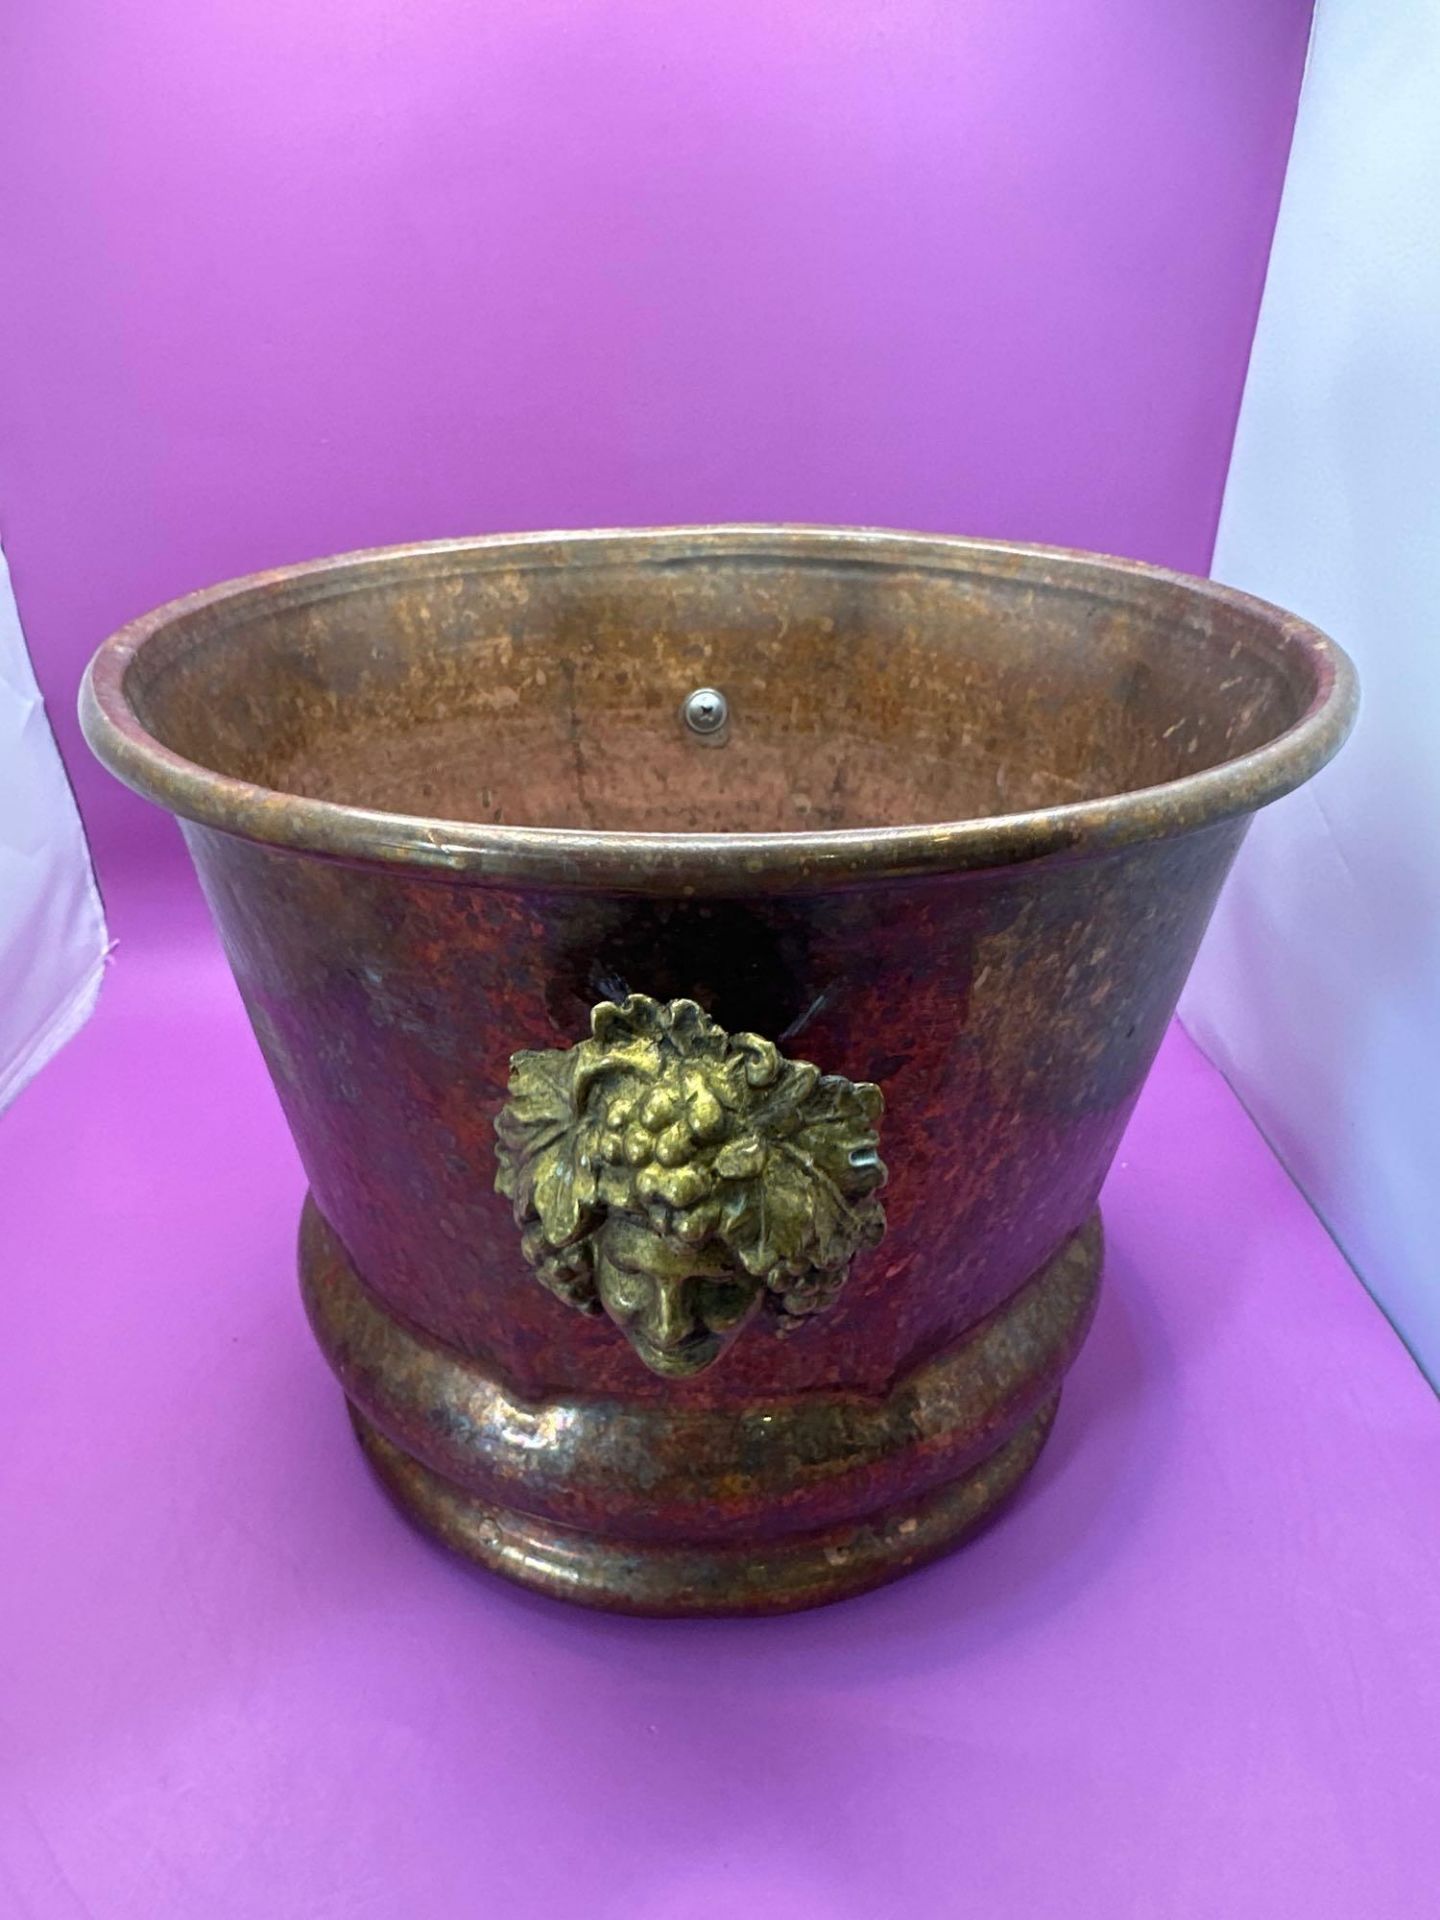 Copper Jardiniere With Brass Handles Depicting A Face With Grapes And Vine 23 X 18.5 cm - Image 2 of 4